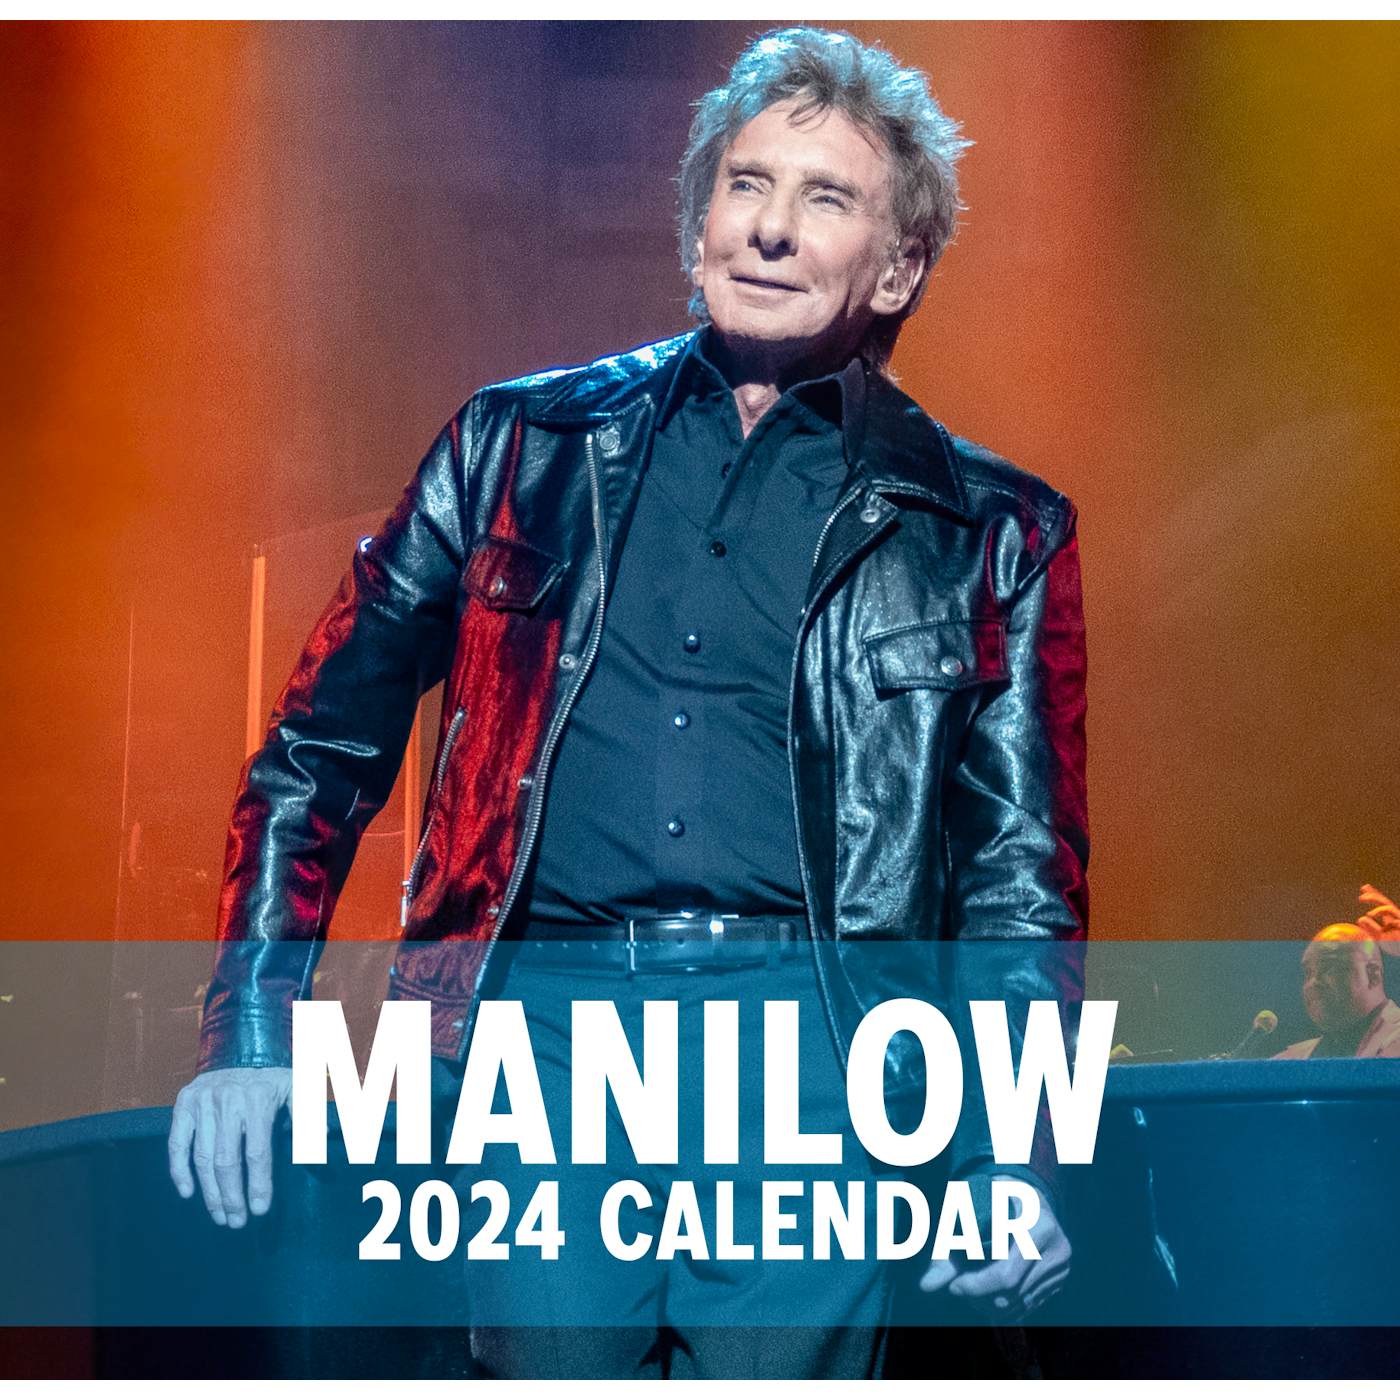 Barry Manilow Shirts, Barry Manilow Merch, Barry Manilow Hoodies, Barry